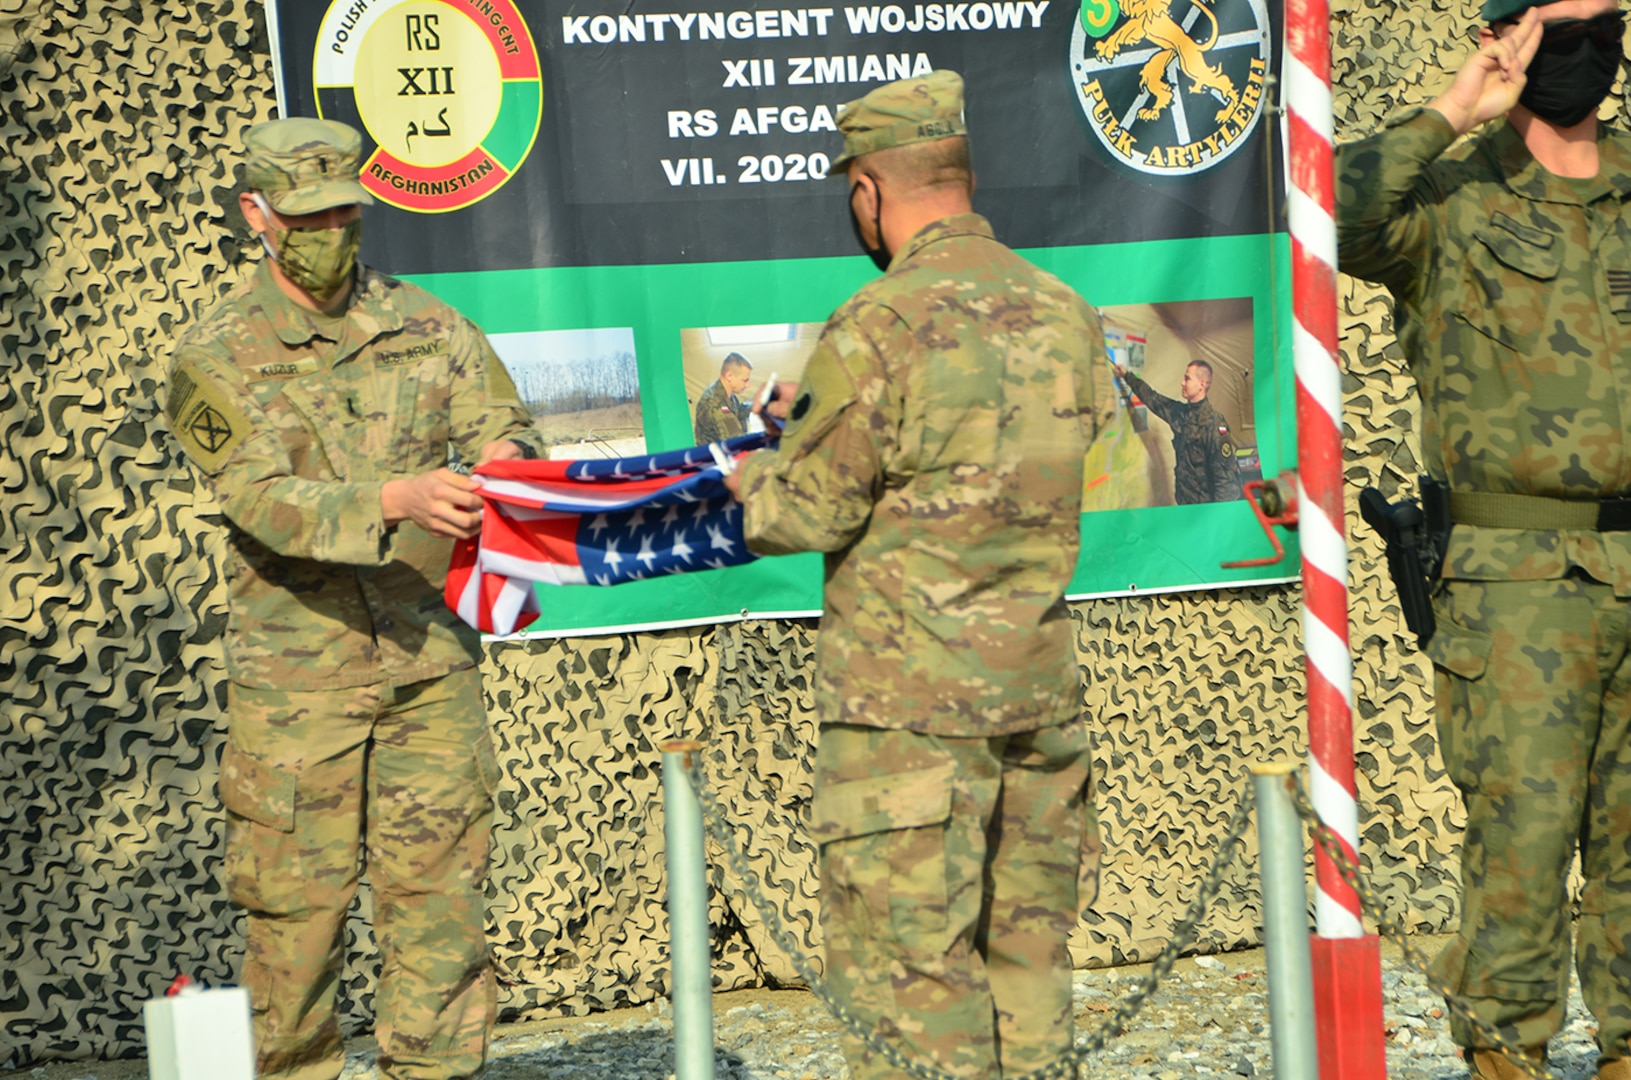 1st Lt. Kurt Kuzur, of Tinley Park, Illinois and Master Sgt. Adam Abdul, of Collinsville, Illinois, fold the U.S. flag during the Illinois Army National Guard Bilateral Embedded Staff Team (BEST) A25 decommissioning ceremony at Bagram Airfield, Afghanistan.